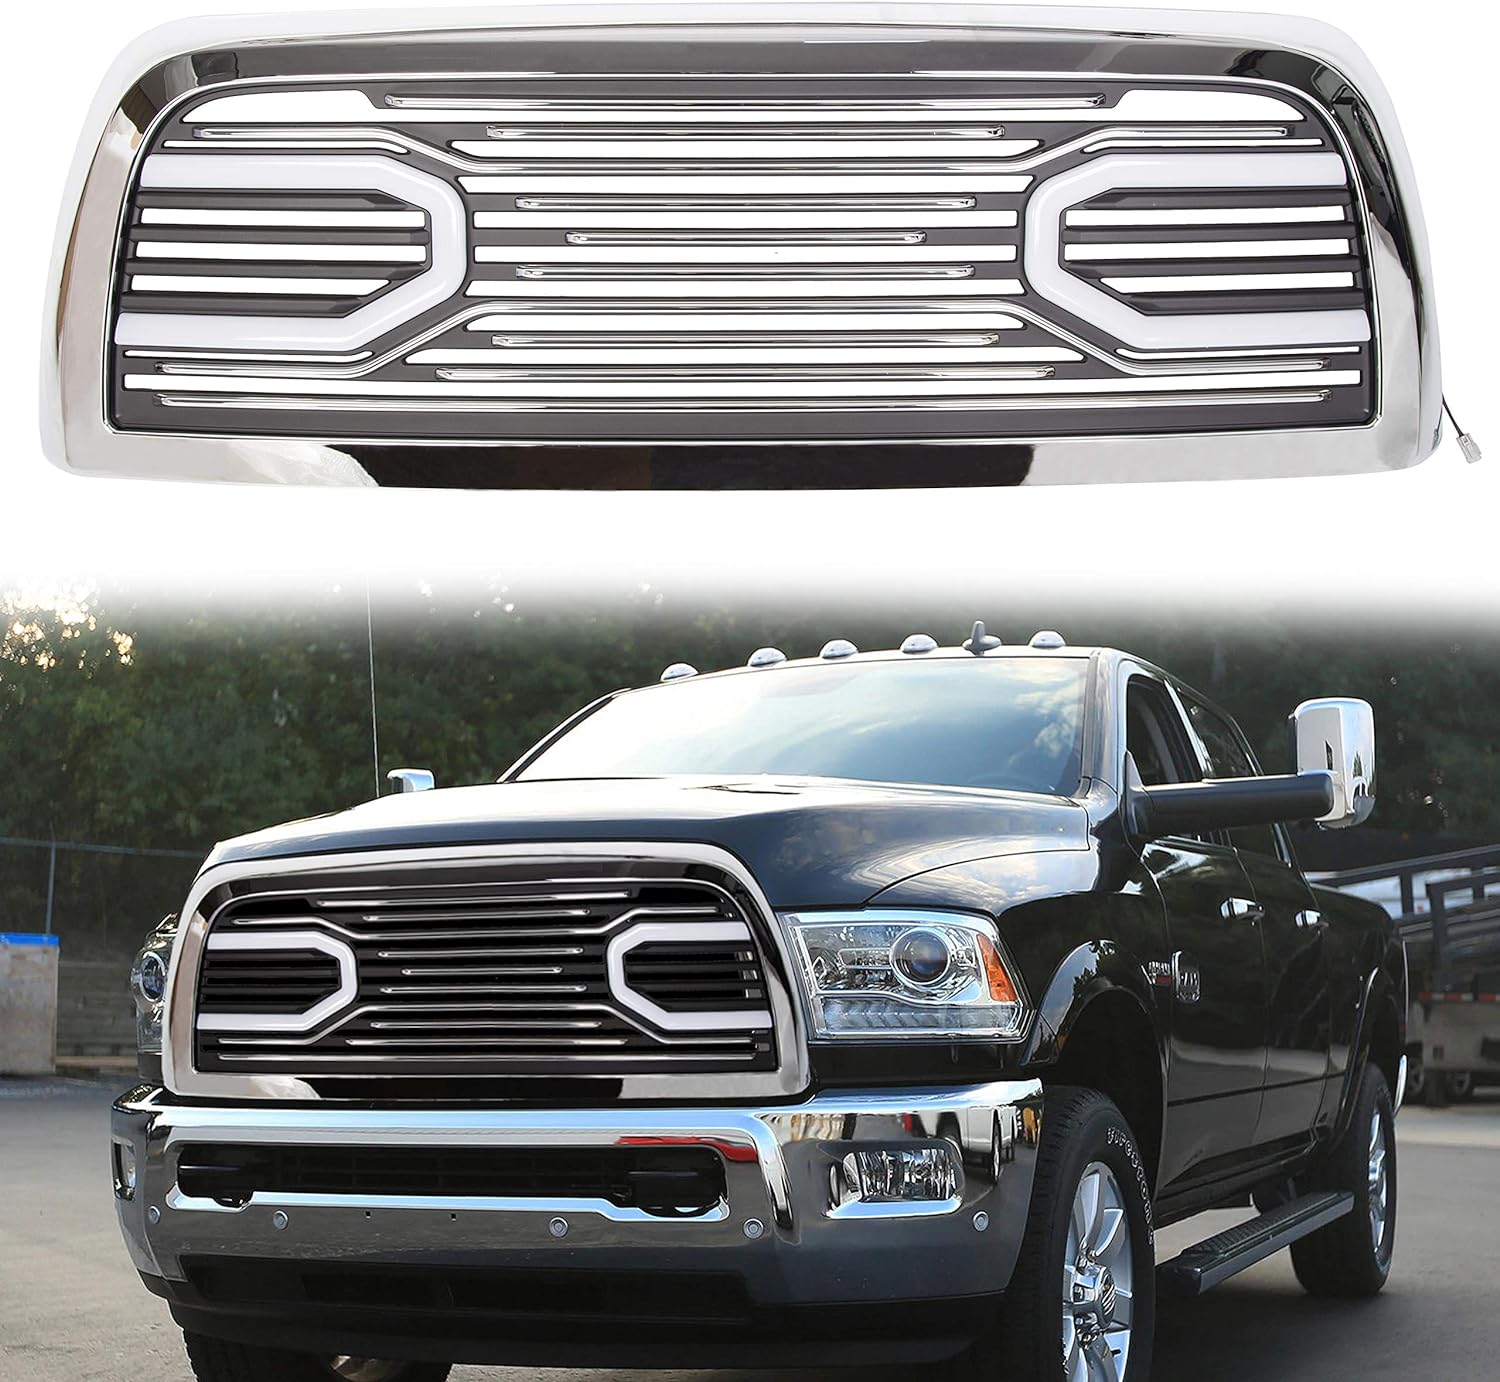 ECOTRIC Front Hood Bumper Grille Grill Compatible with 2010-2018 Dodge Ram 2500 3500 4500 Replacement Shell Big Horn Horizontal Style -